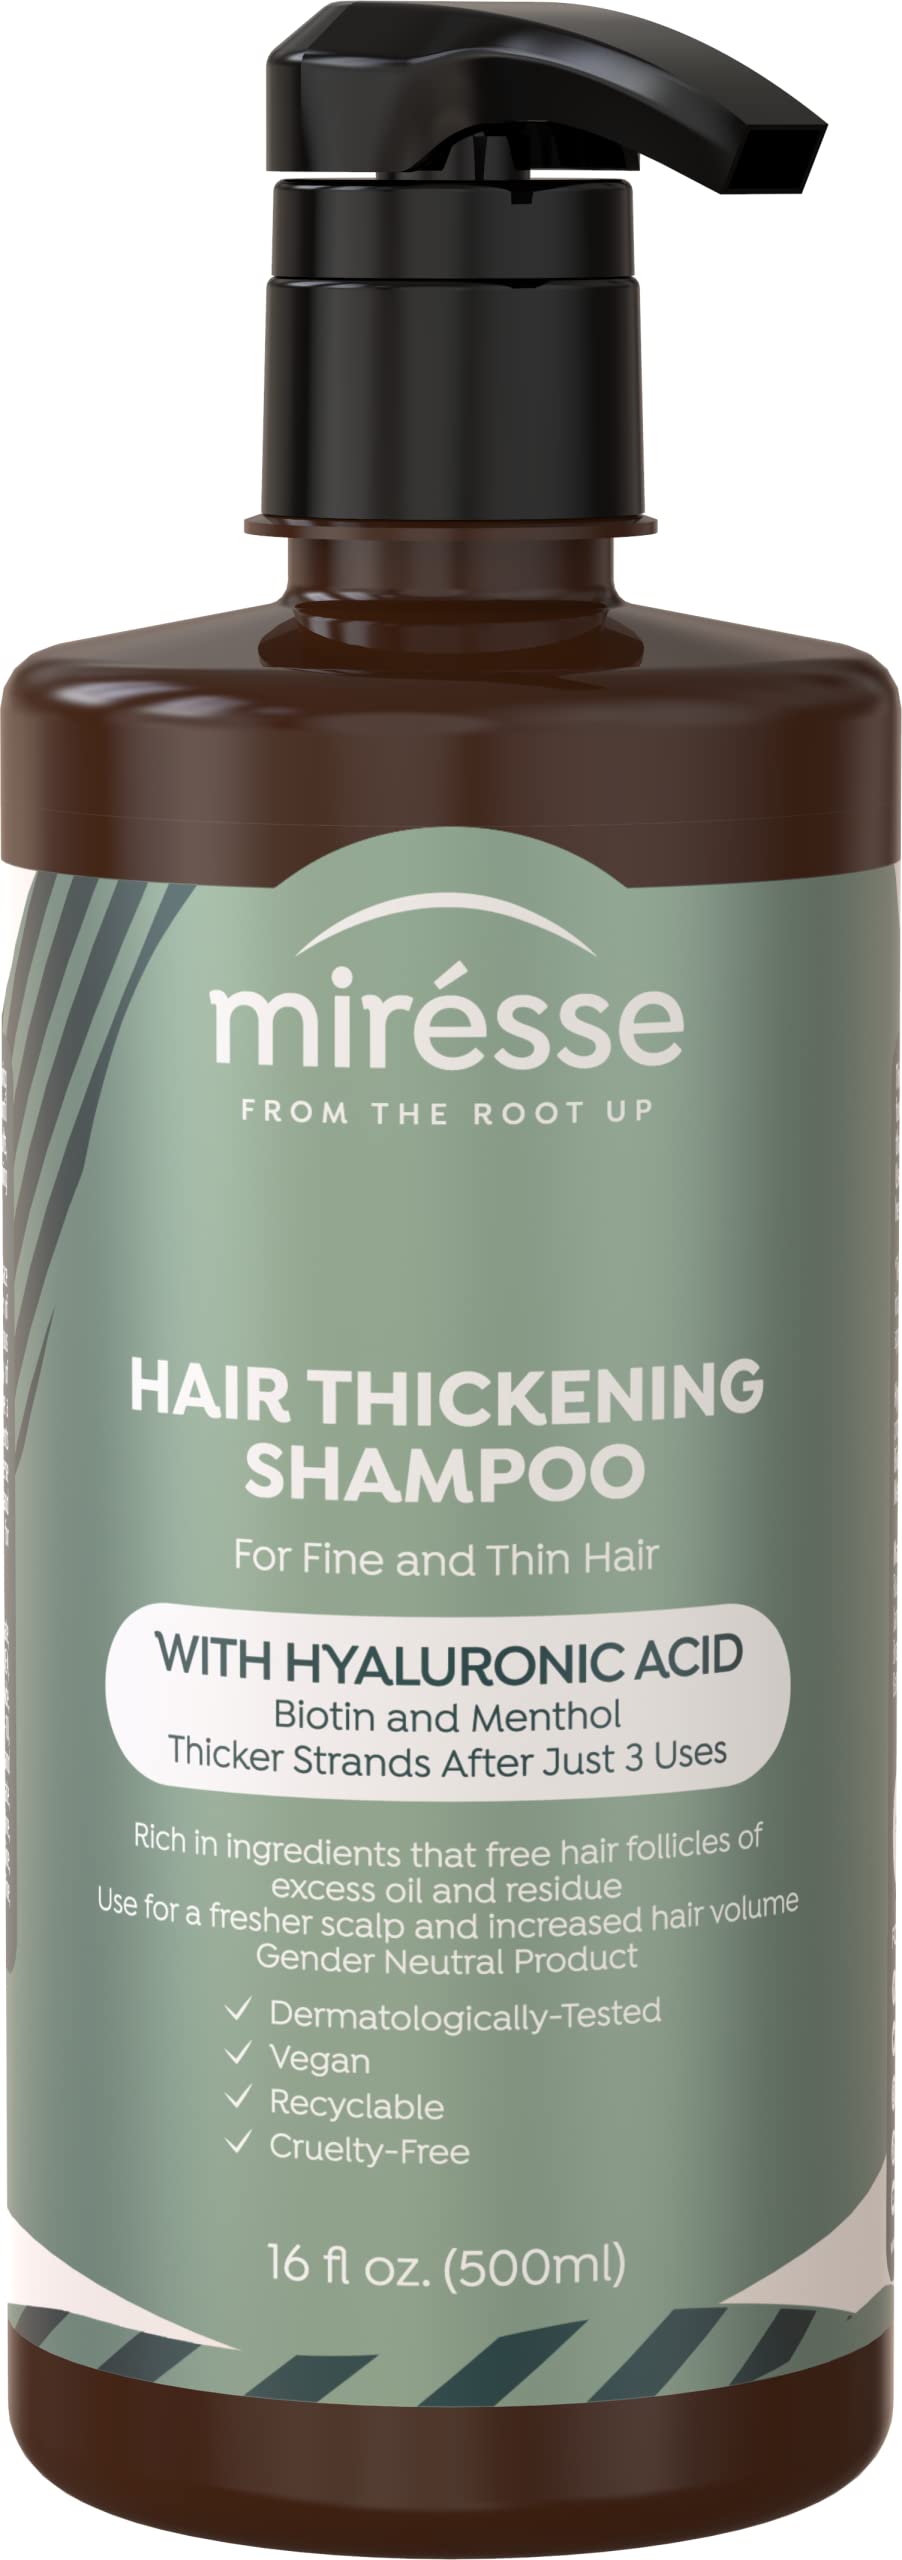 miresse MIRÉSSE - Pack of 3 Hyaluronic Acid Hair Thickening Shampoo - Shampoo for Oily Hair - Biotin Treatment for Women and Men - Vegan and Cruelty-Free - Proven Results - 48 Fl oz